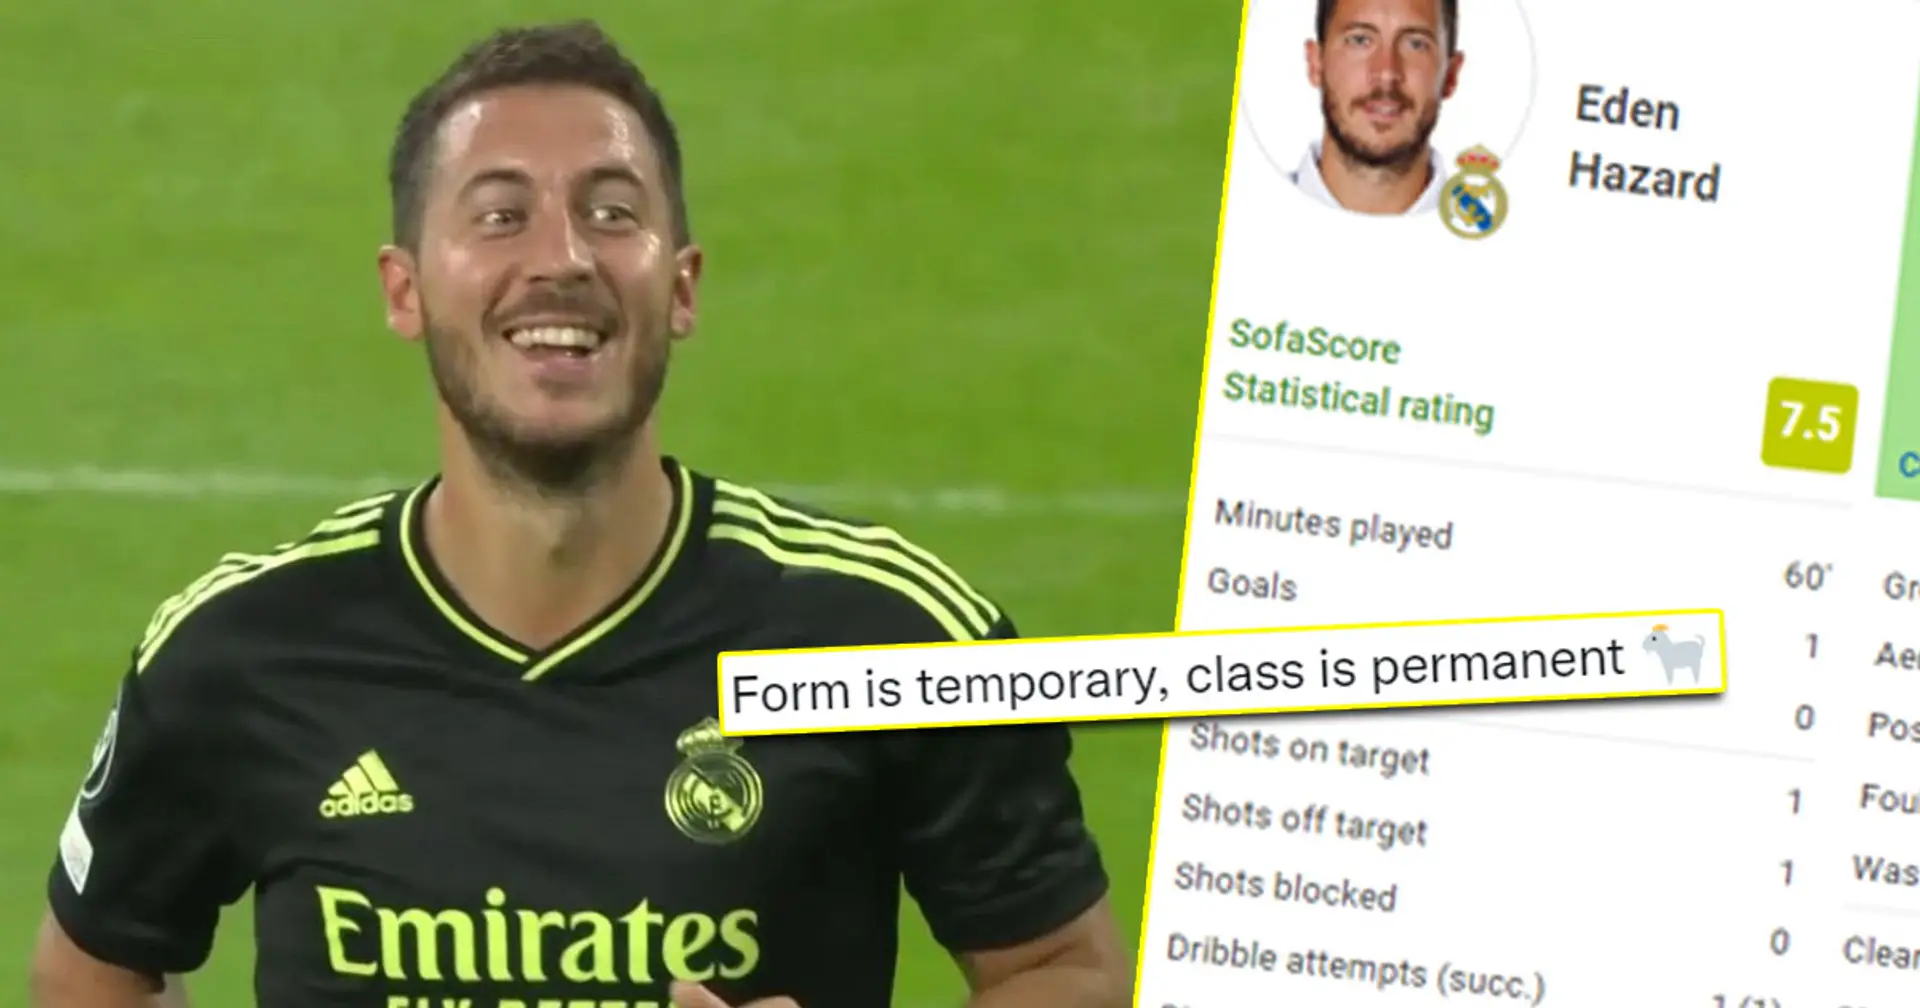 'He deserves this': fans react to vintage Hazard display against Celtic